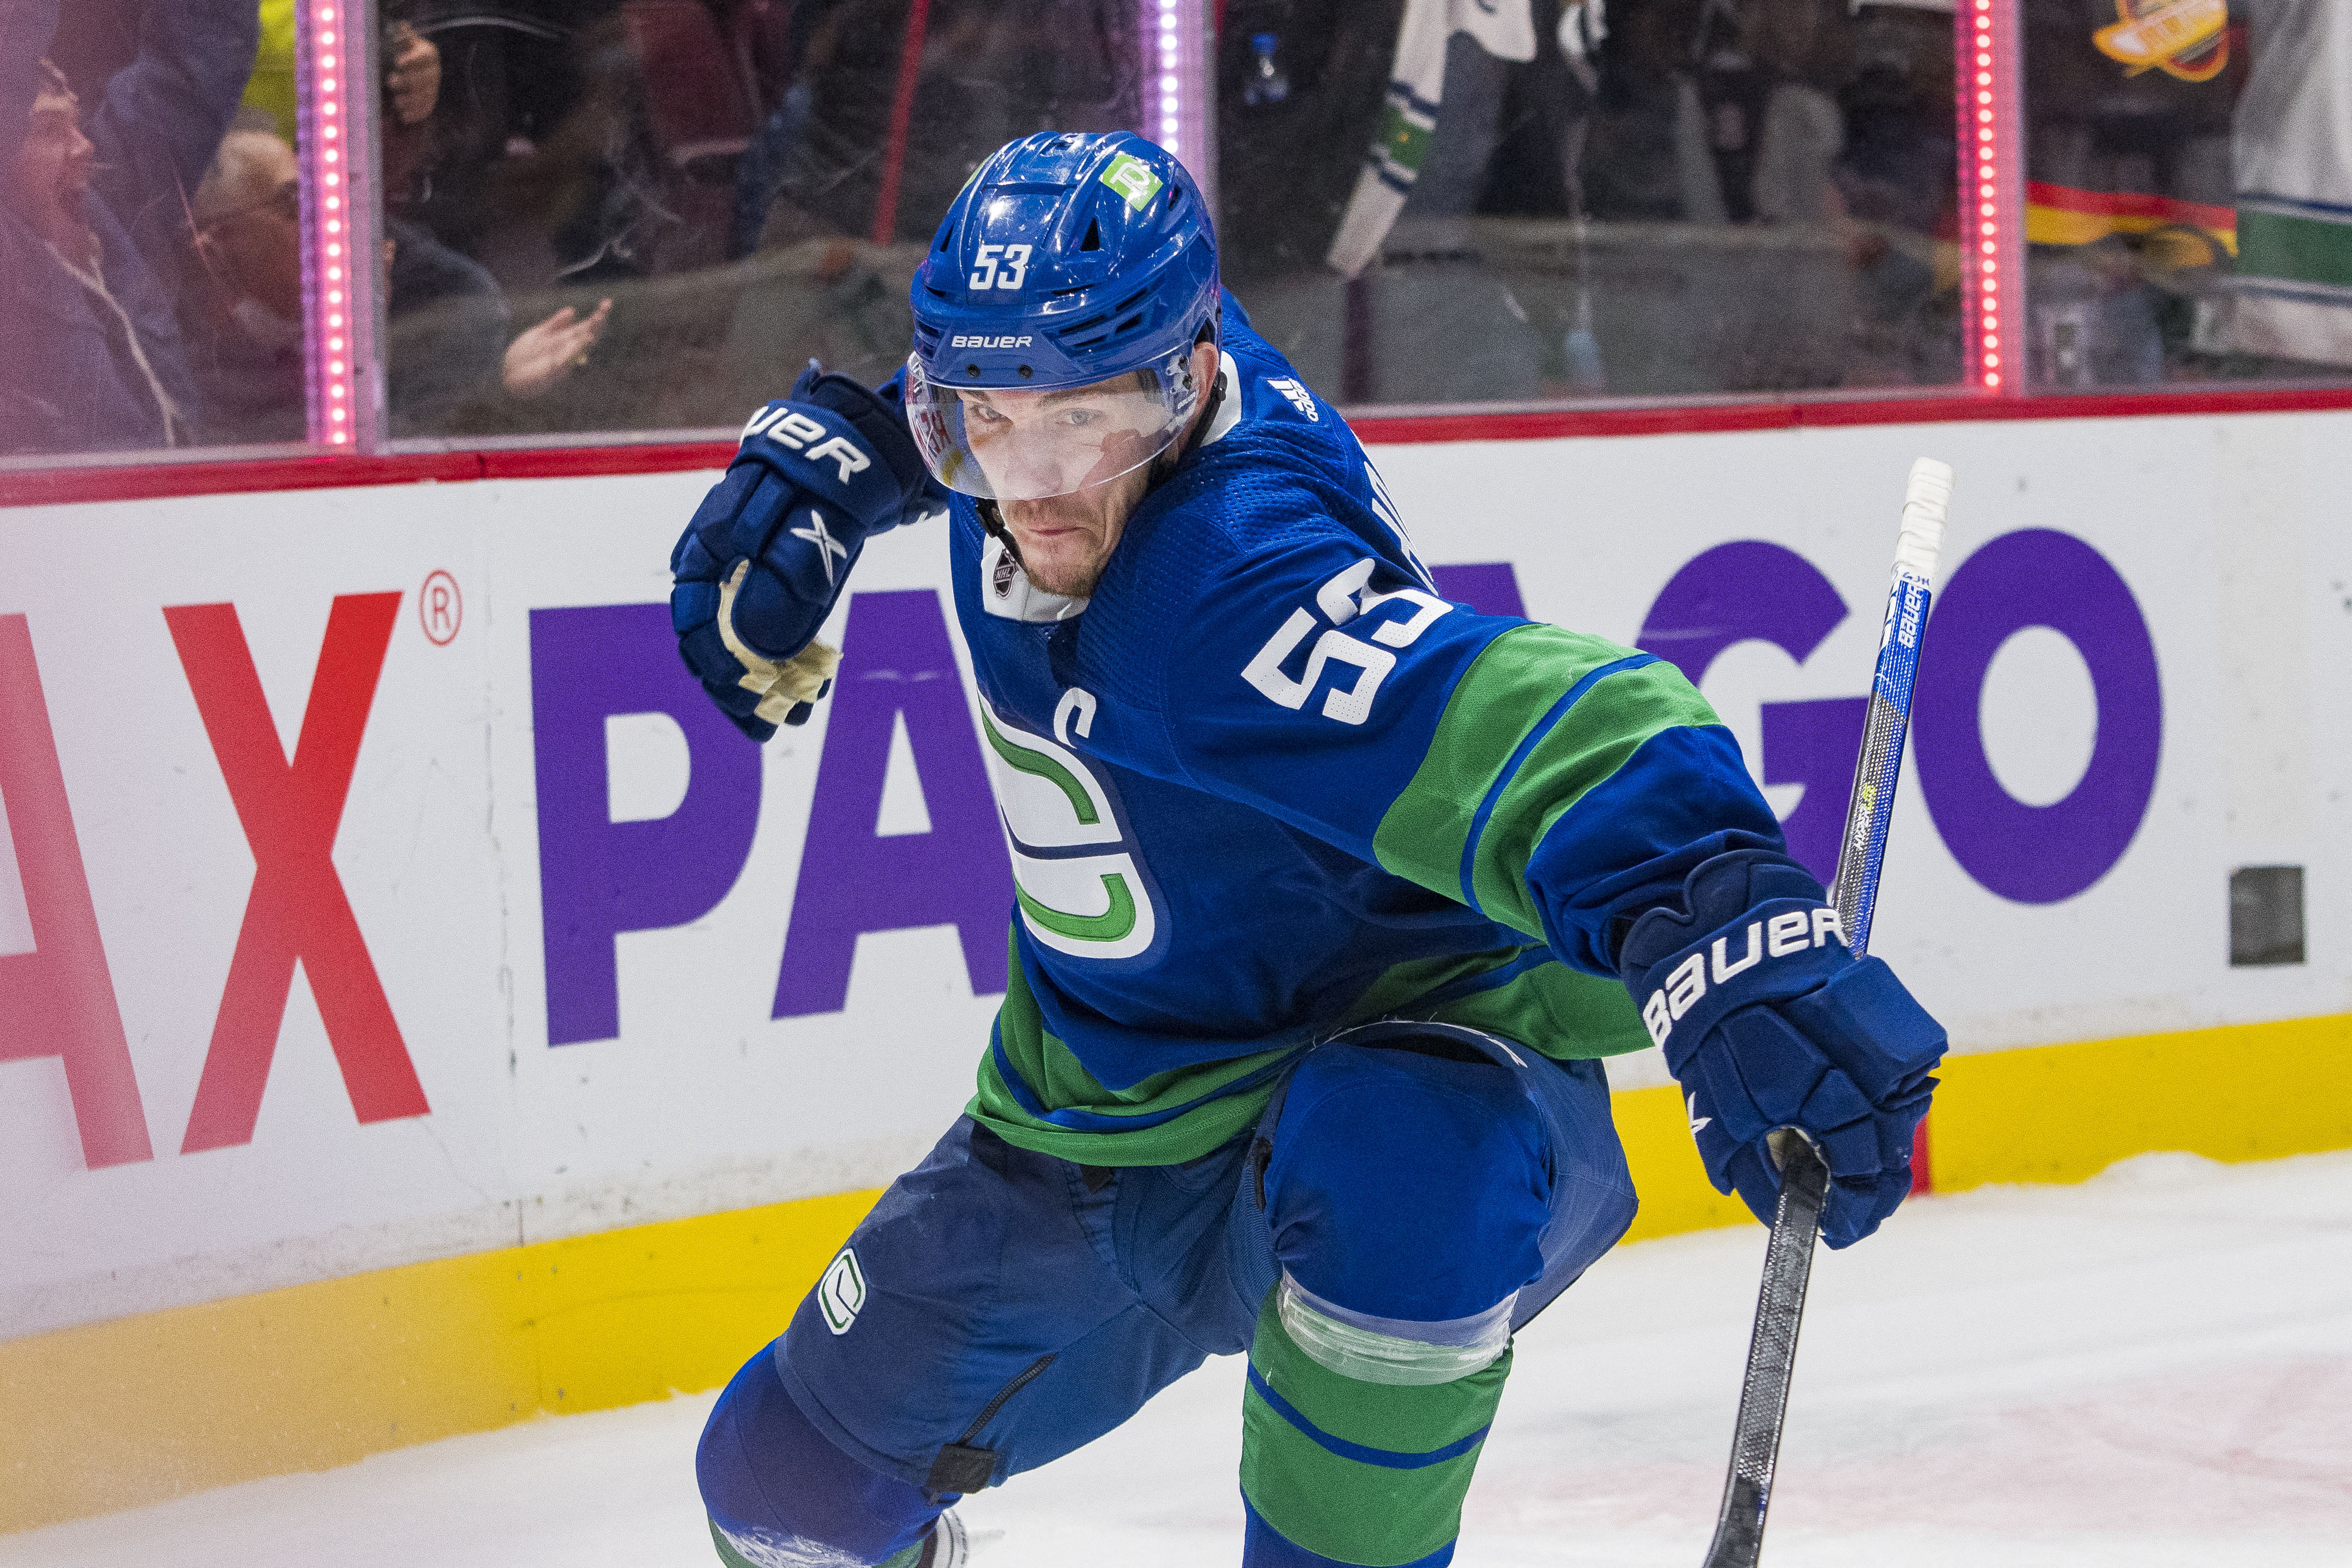 Horvat rallies Canucks past Blue Jackets 4-3 for 5th in row